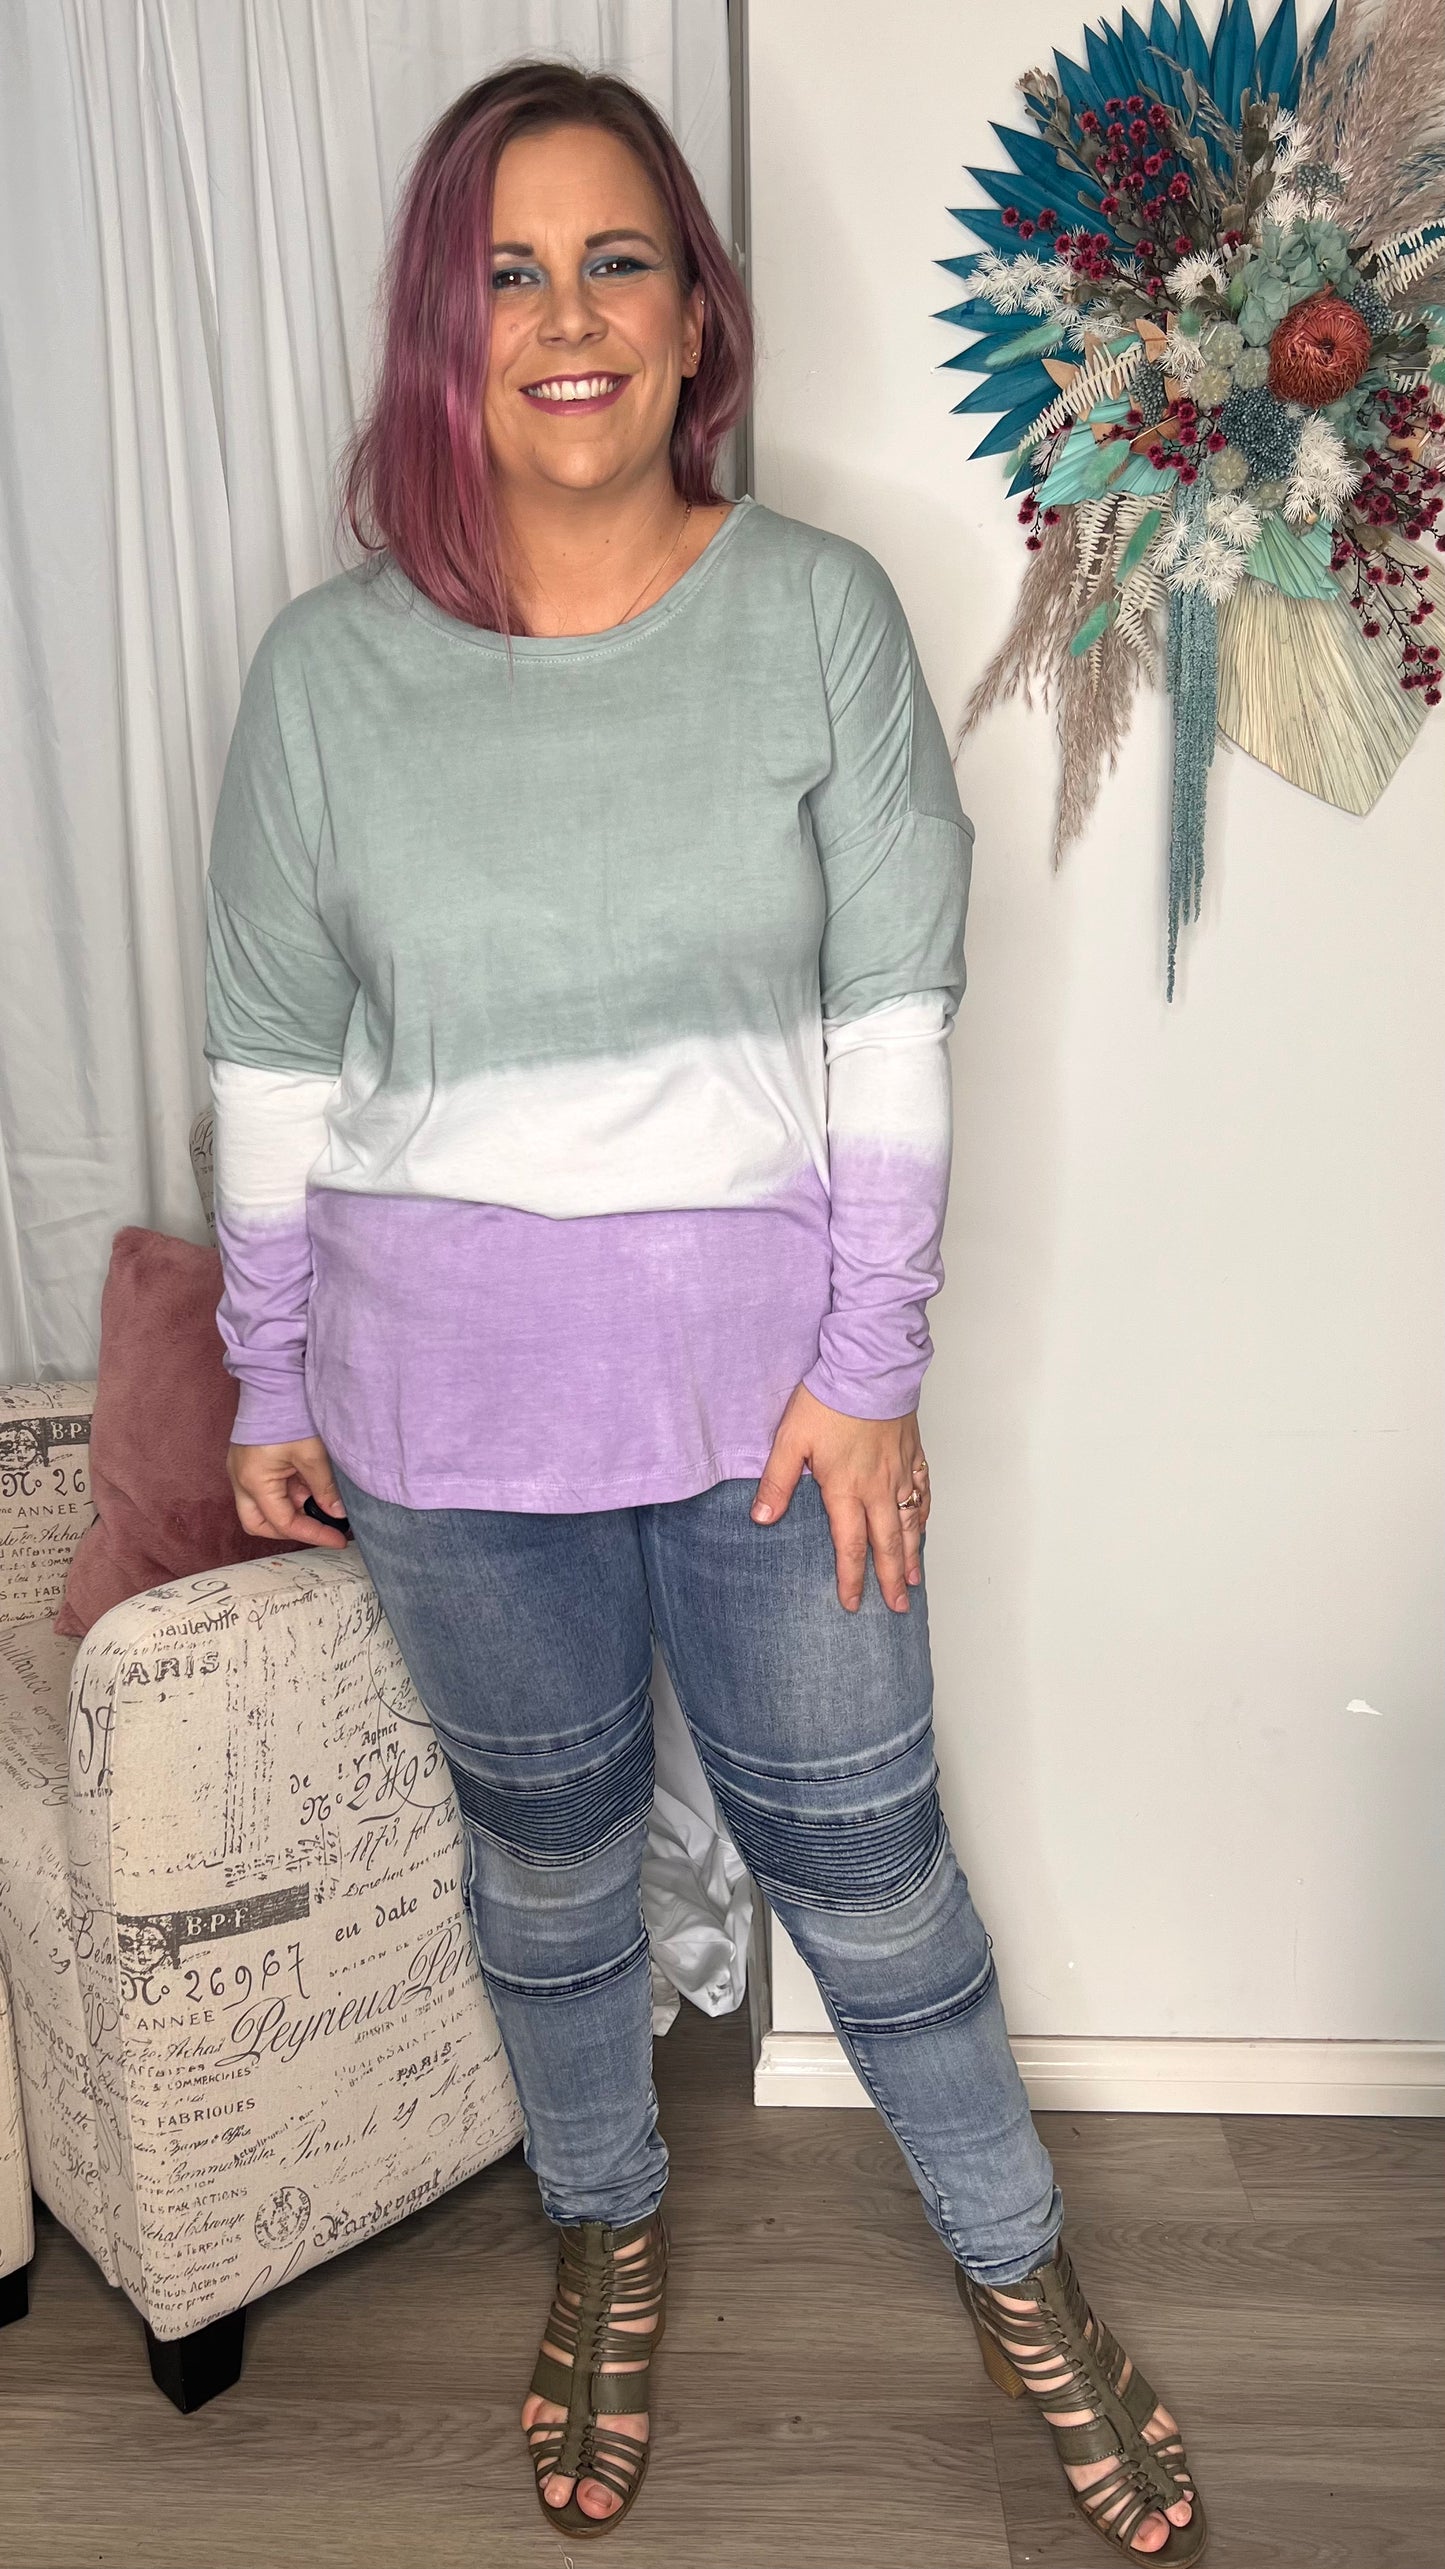 Cascade Long Sleeve Tee: A classic Elm long sleeve tee made from stretchy soft cotton elastane and featuring a flattering scoop hemline with cute and colourful tie dye on the body &amp; slee - Ciao Bella Dresses 